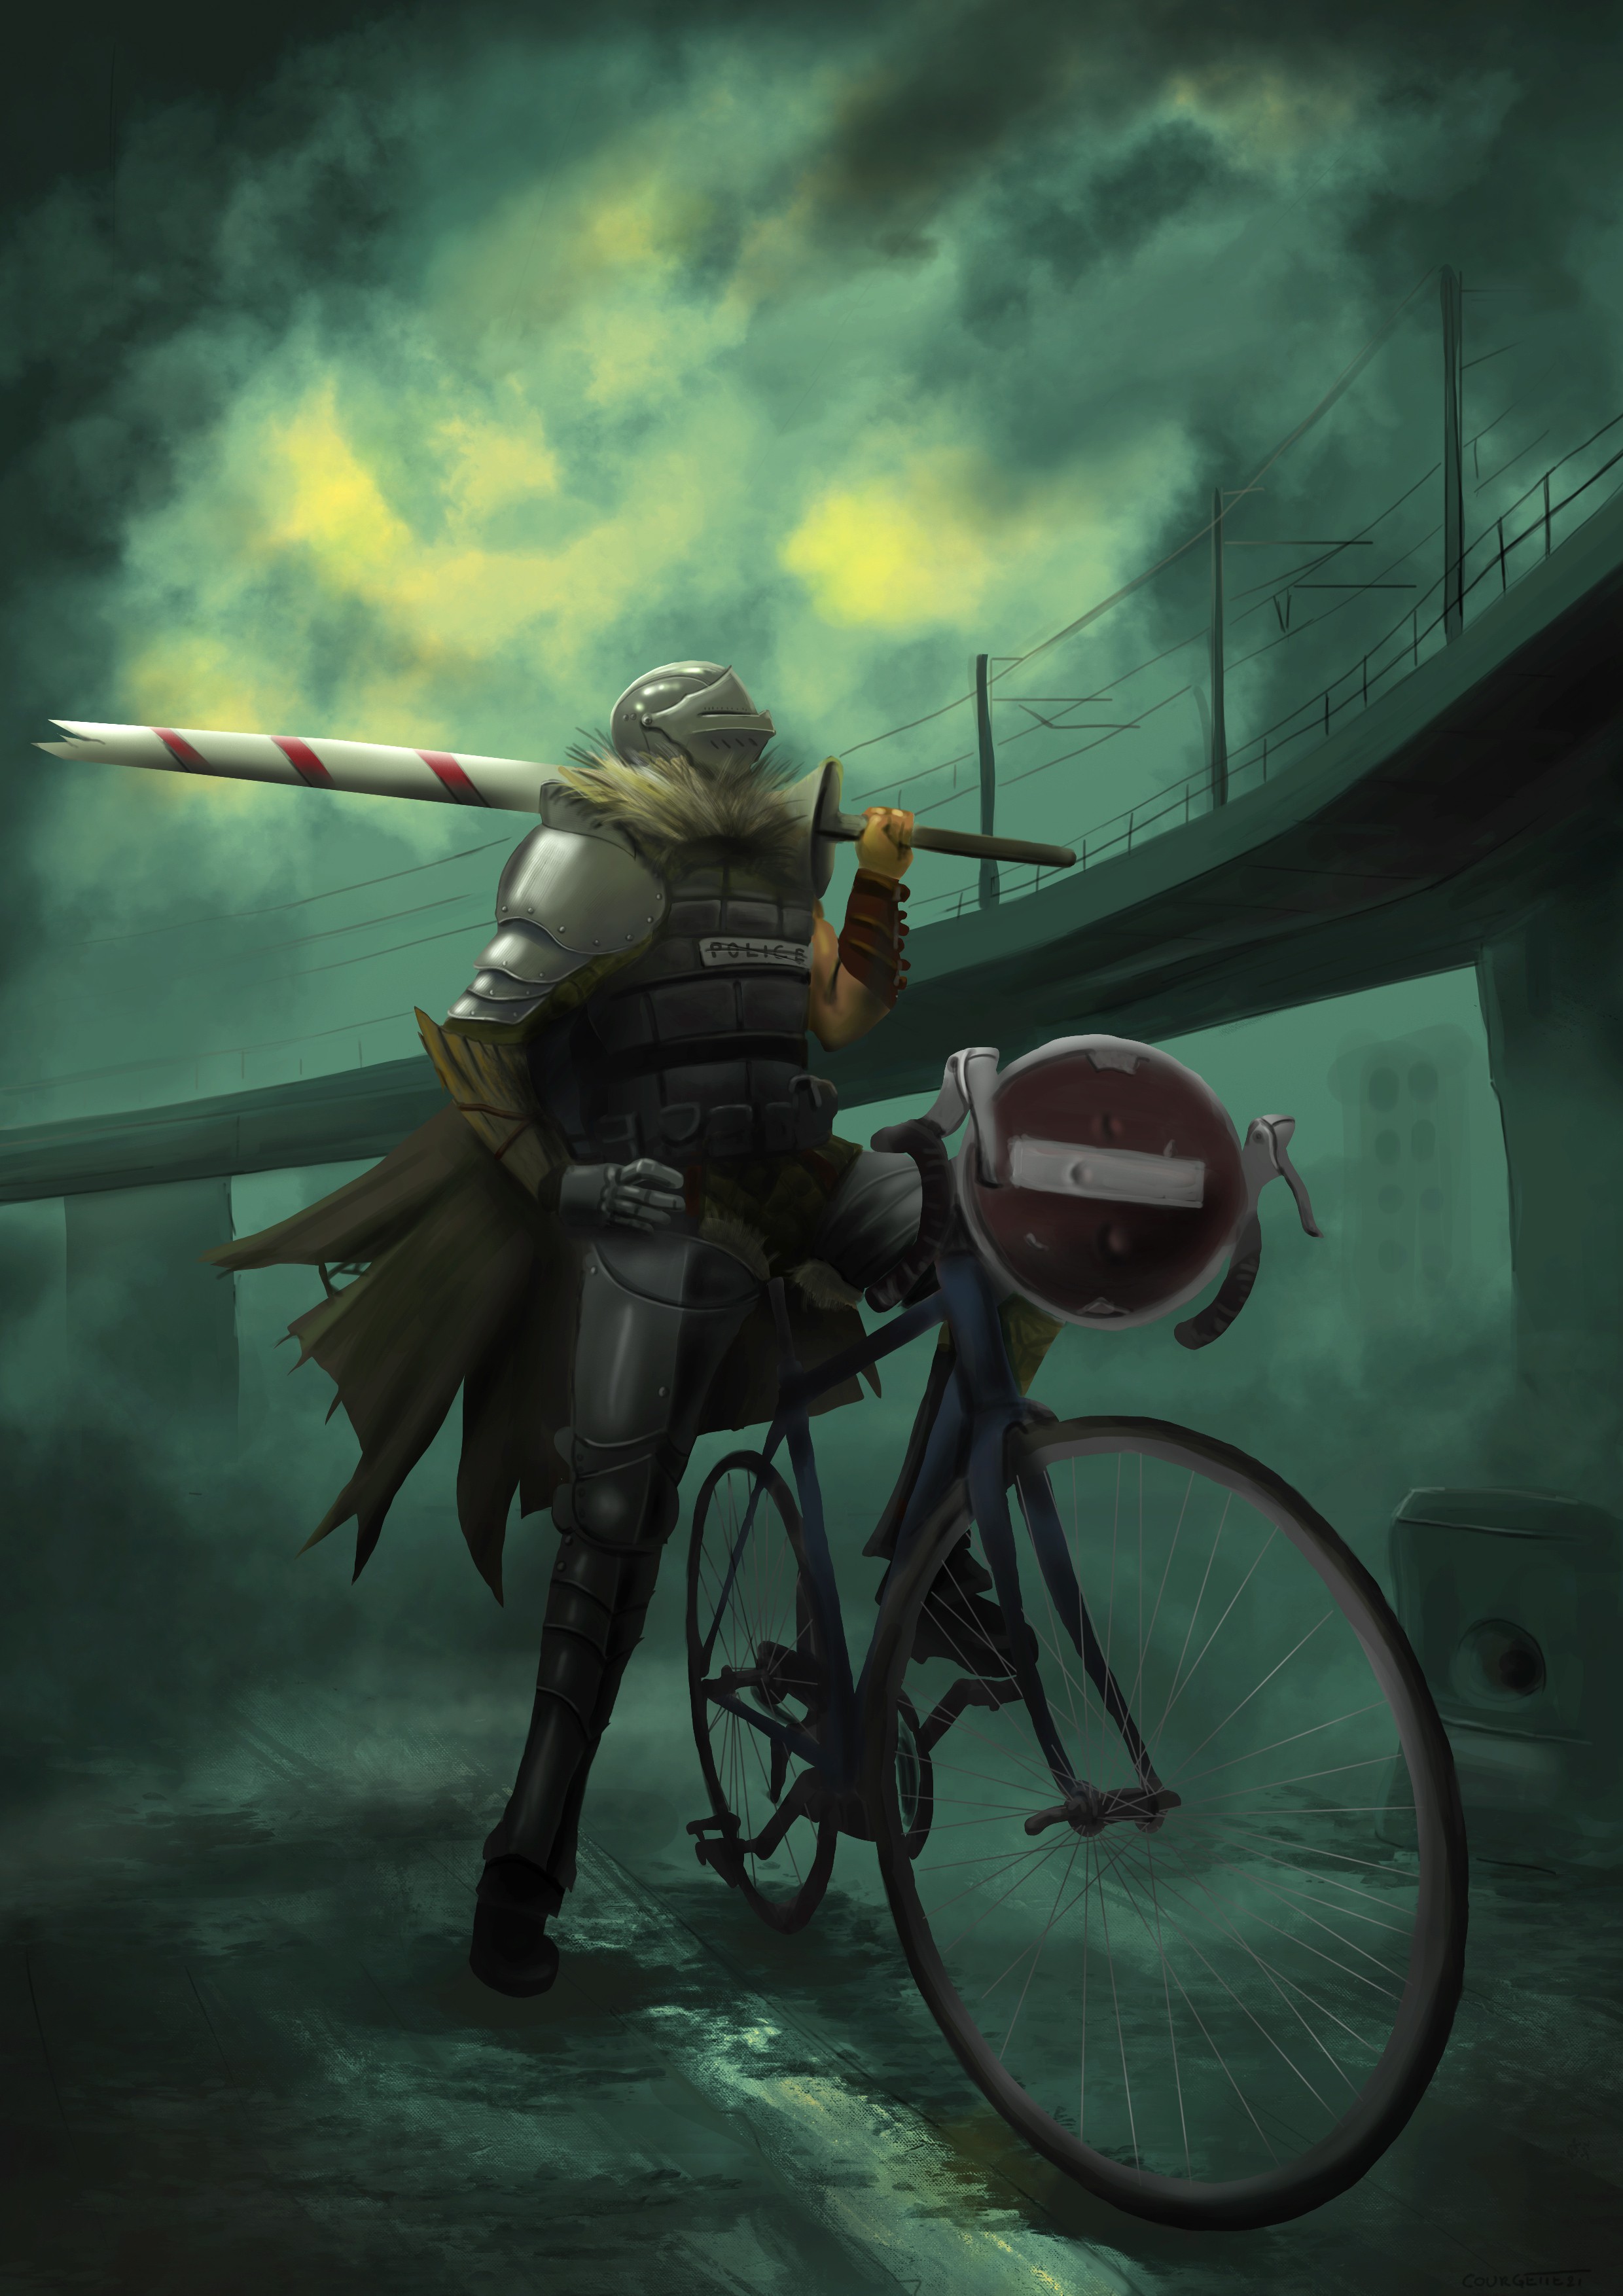 Bicycle knight par Courgette